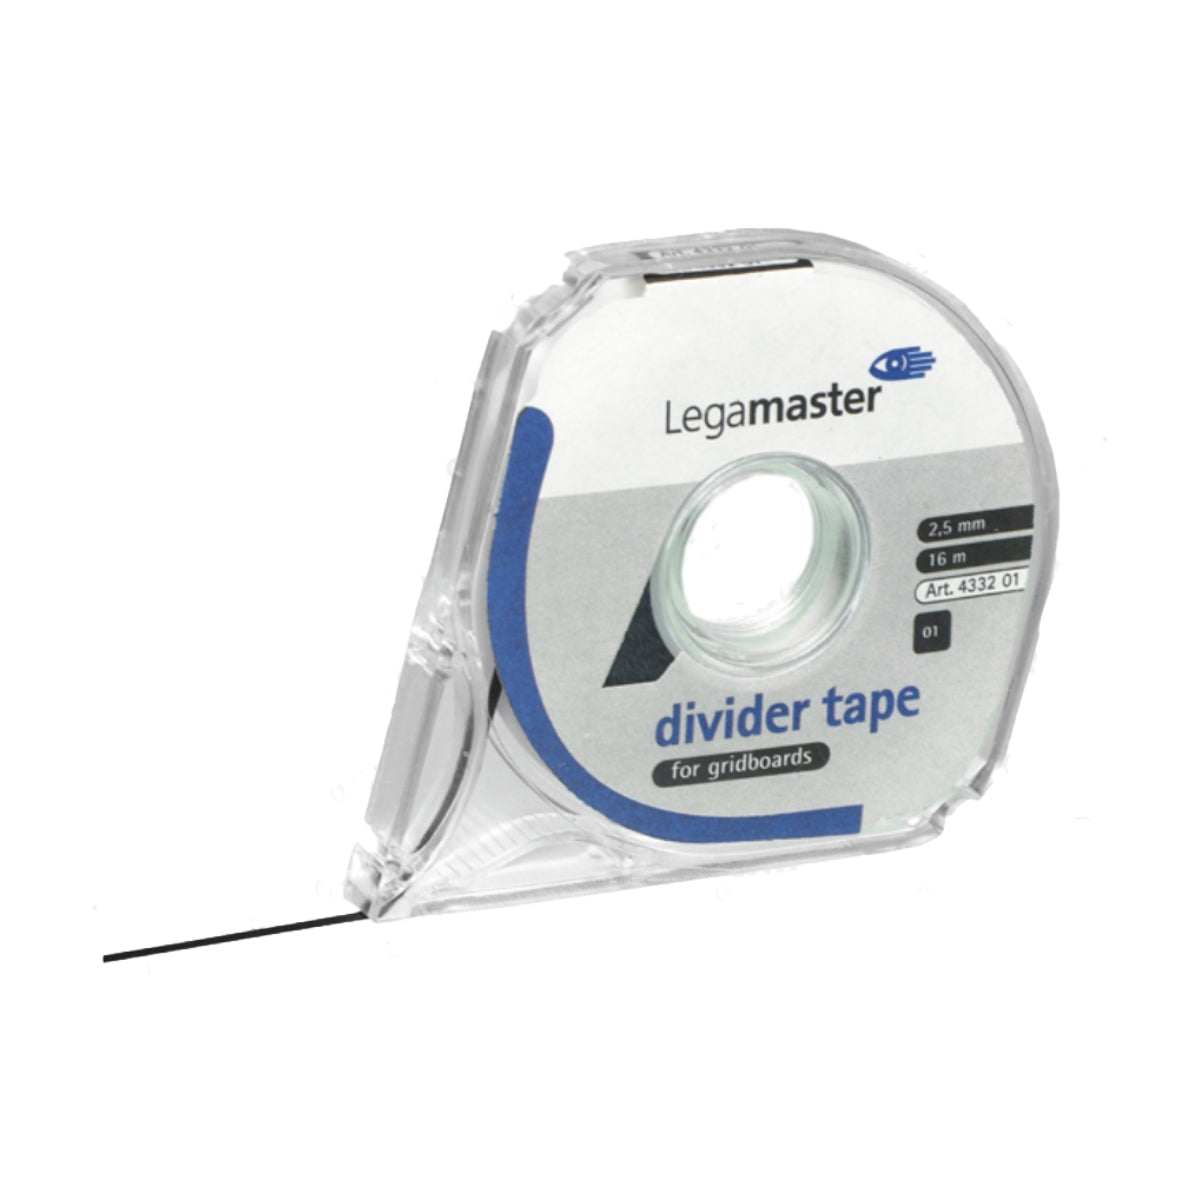 Legamaster Self-Adhesive Divider Tape for 2.5mm 16m, ... - One LLC